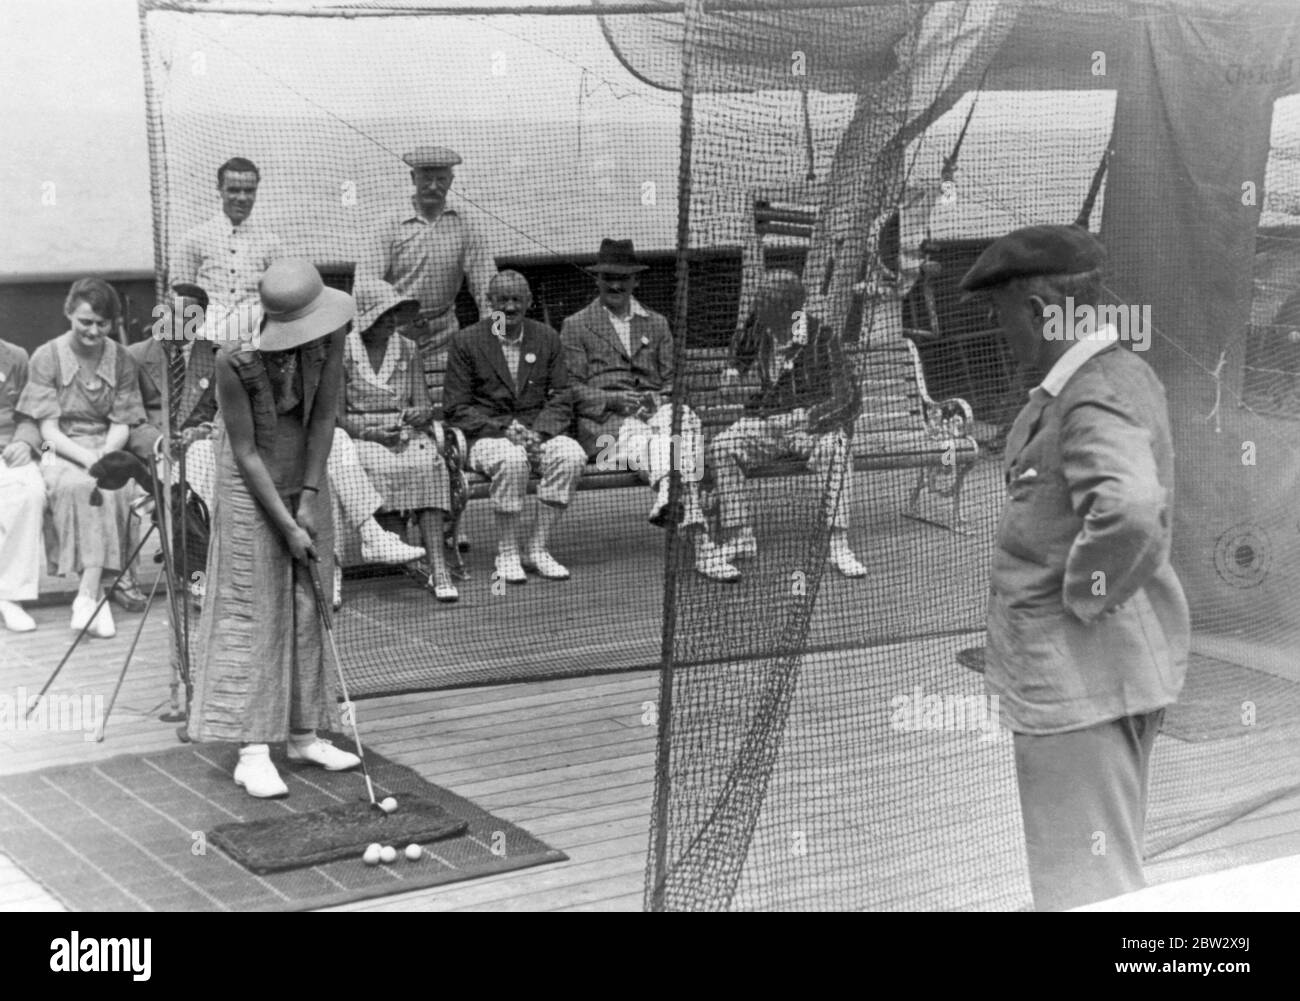 Deck games on board an ocean liner in the 1930s. Here a female passenger is taking part in a golf contest. She is aiming to hit the ball at a target painted on the back netting (right). Stock Photo